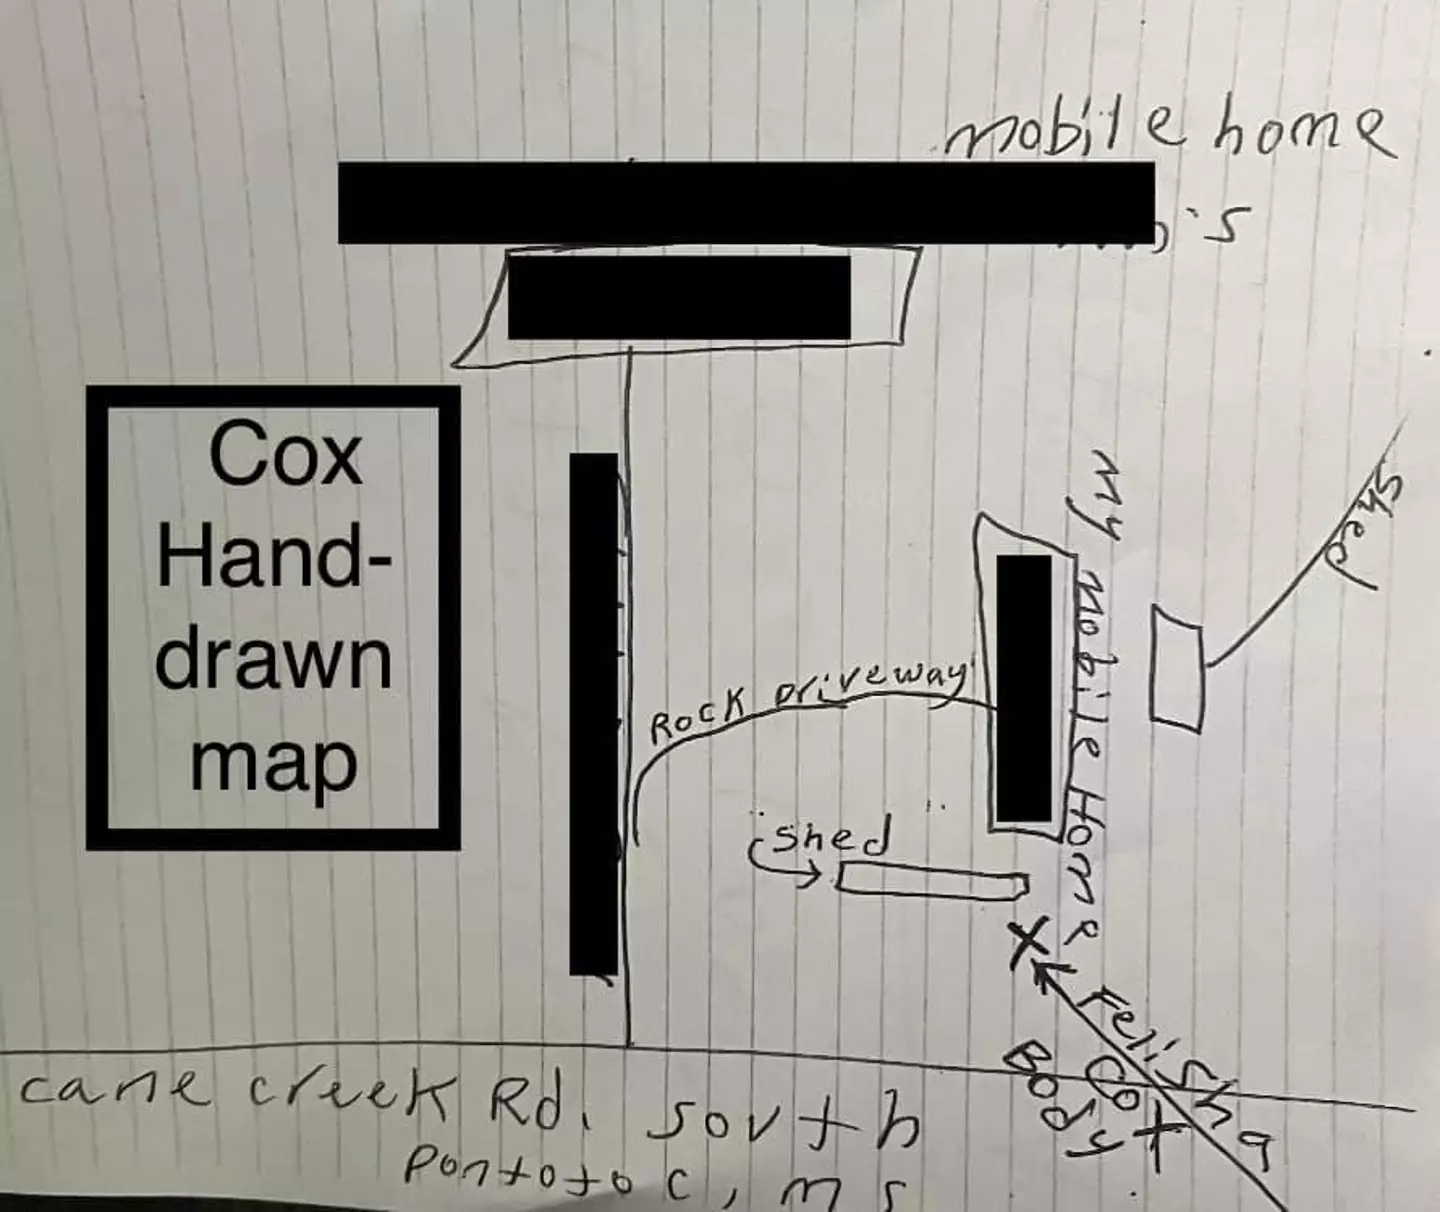 Cox drew a map to reveal the location of Felicia's body.